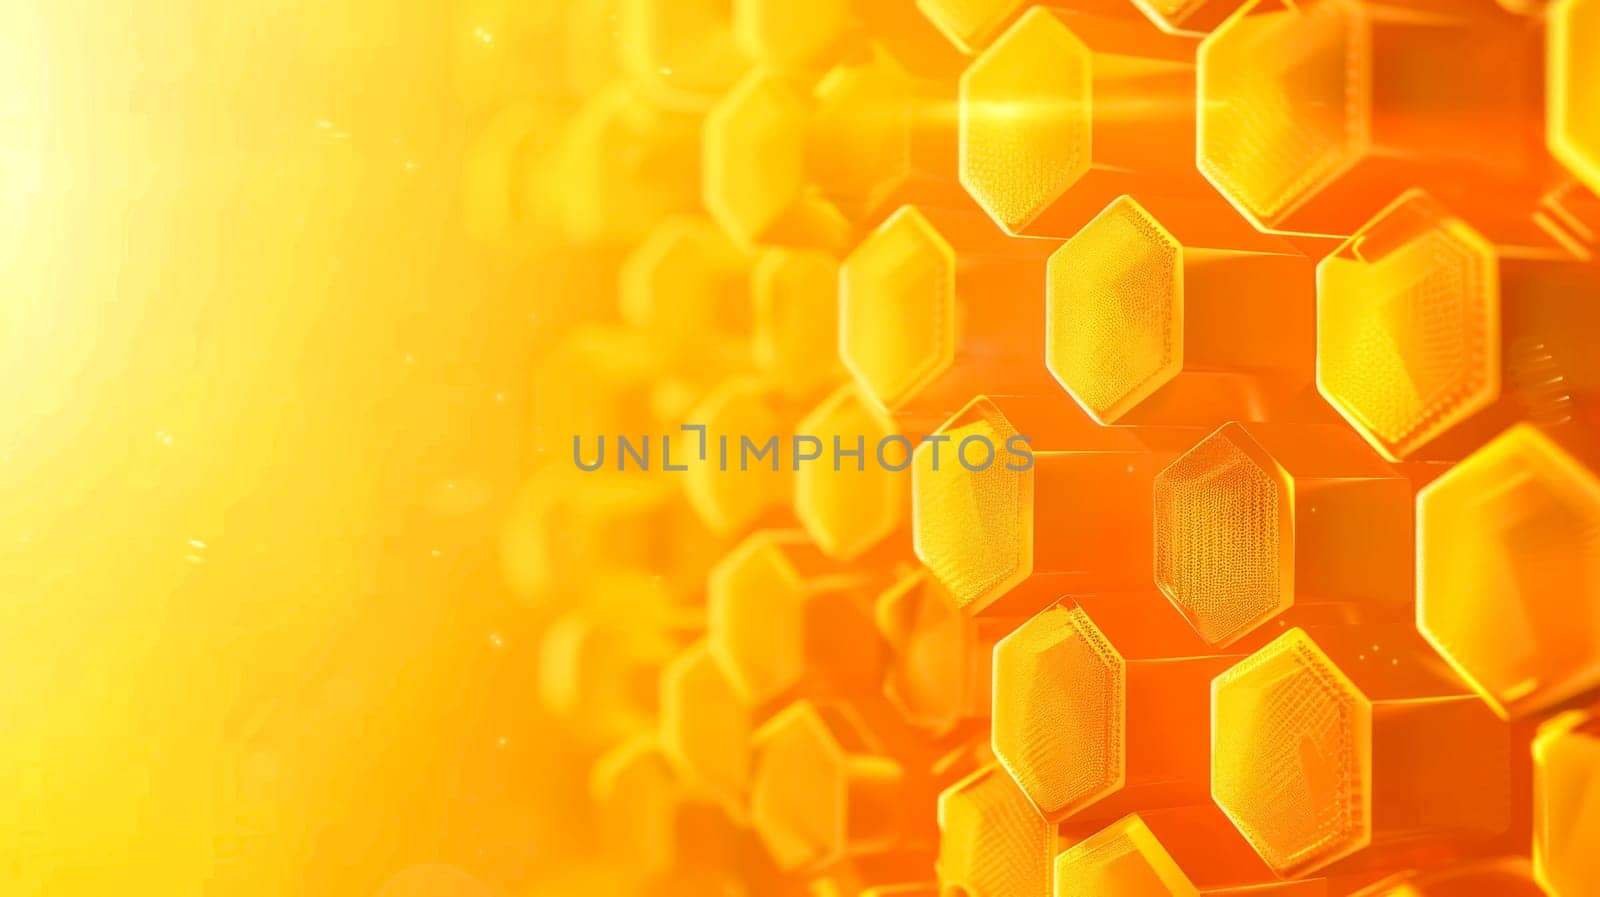 Close-up of a honeycomb structure with glowing warm tones